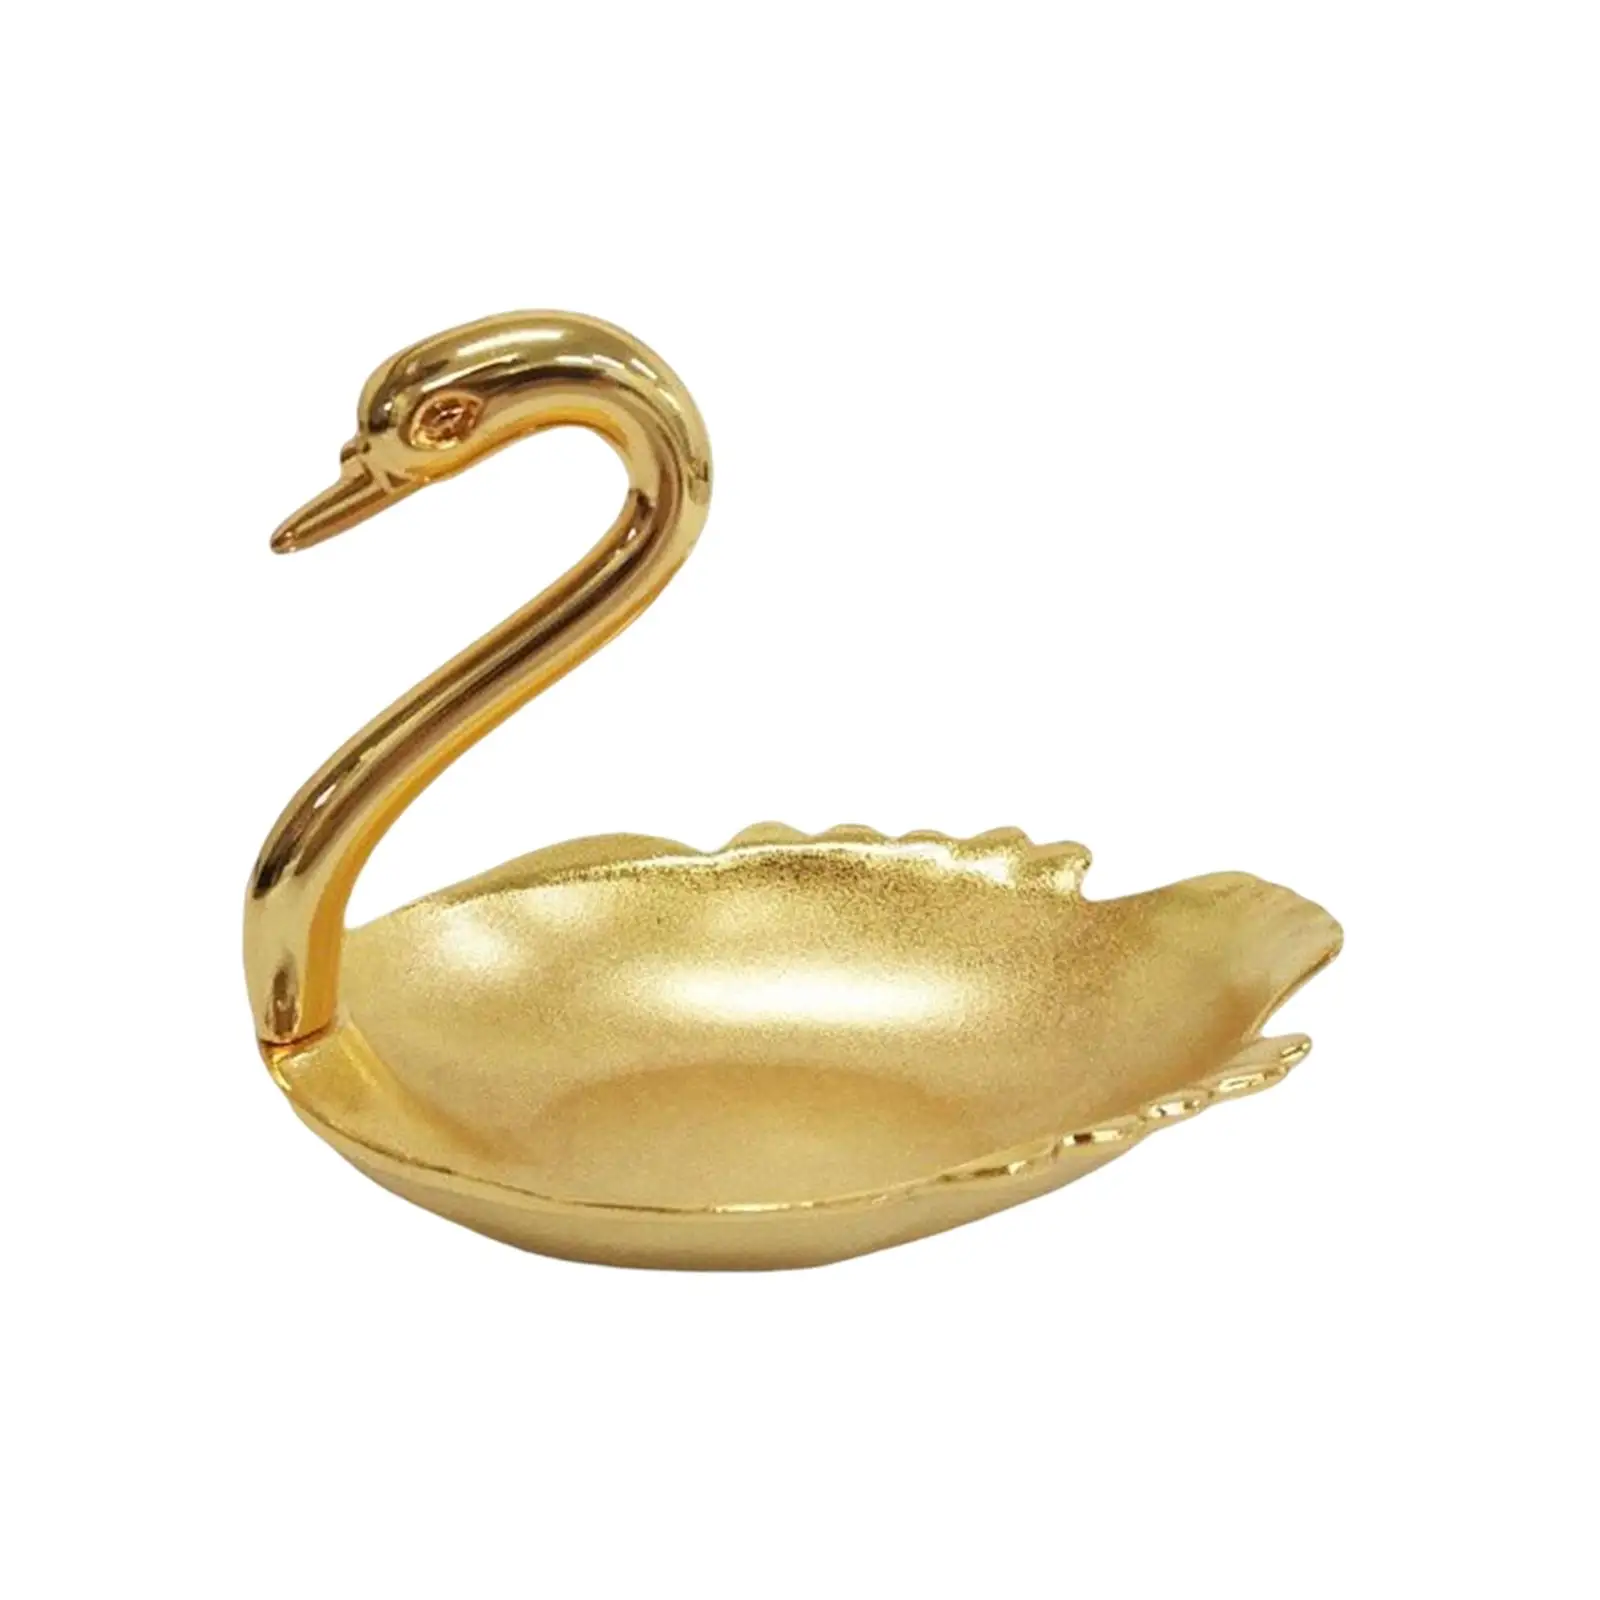 Metal Swan Shape Fruits Serving Tray Party Snacks Plate Dessert Platter Candy Dish for Hotel Dining Home Decoration